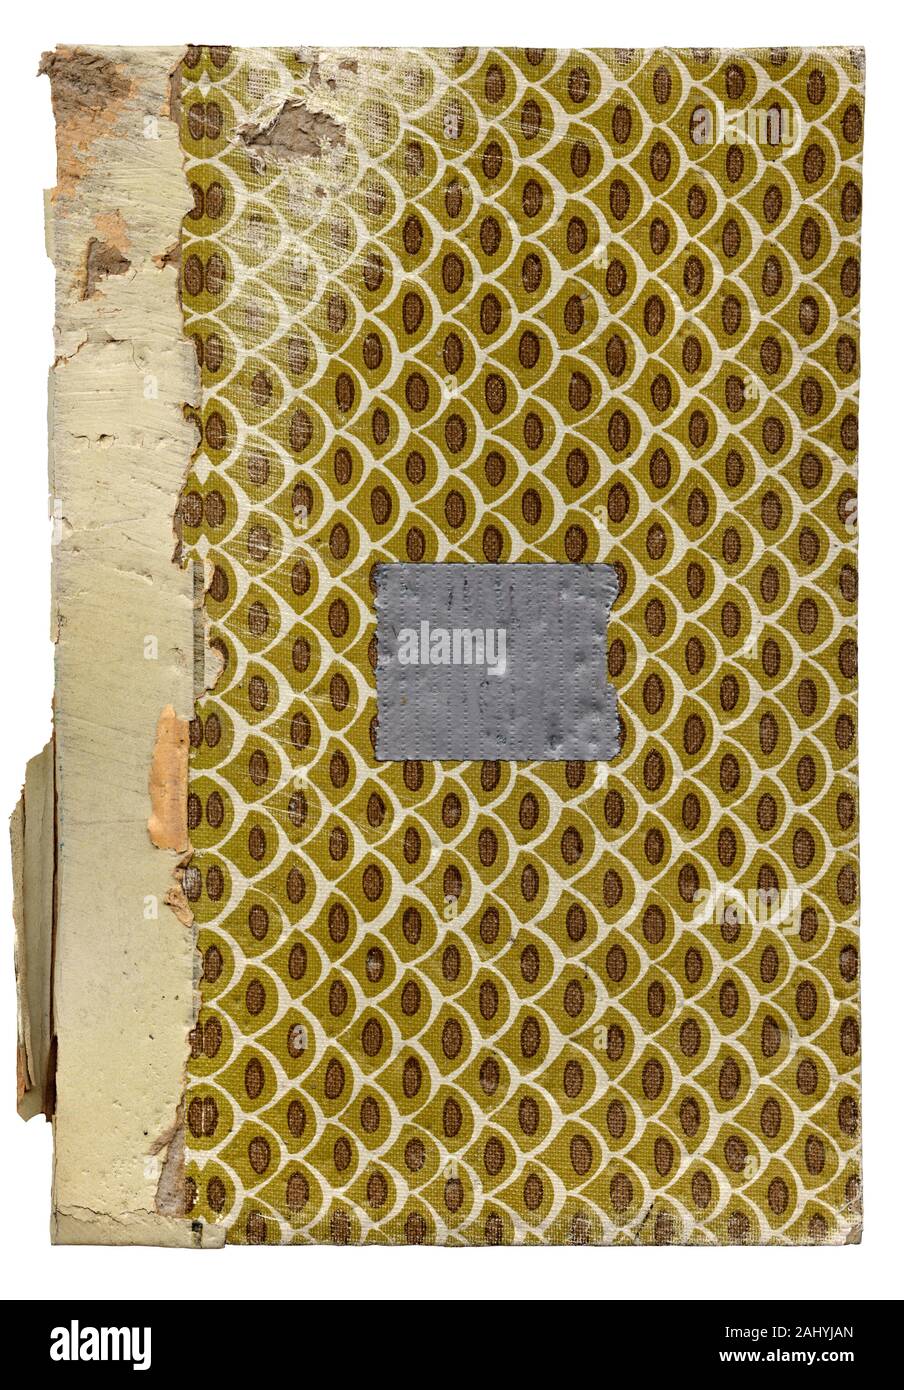 Grungy and gritty old book cover with adhesive tape stuck in the middle of the paper. This is a high resolution scan showing all the detail. Stock Photo